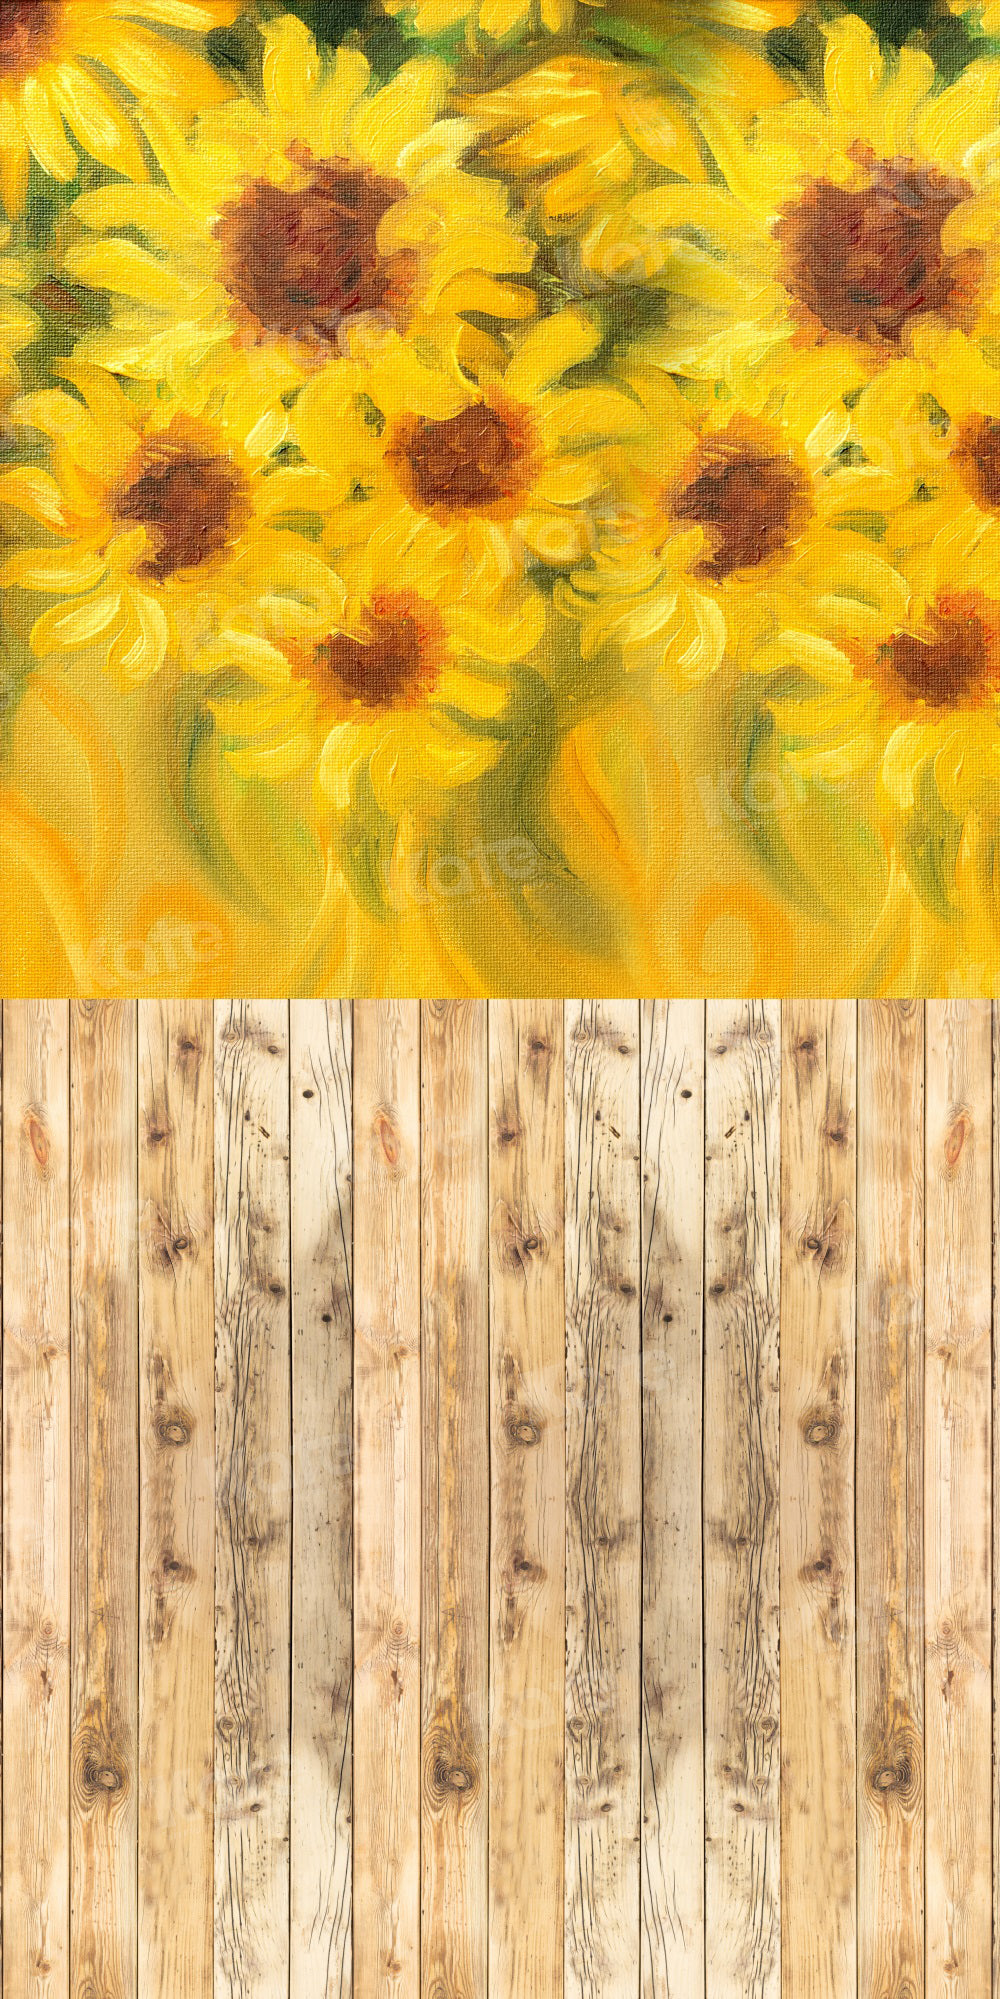 Kate Sweep Autumn Sunflower Wood Floor Backdrop for Photography